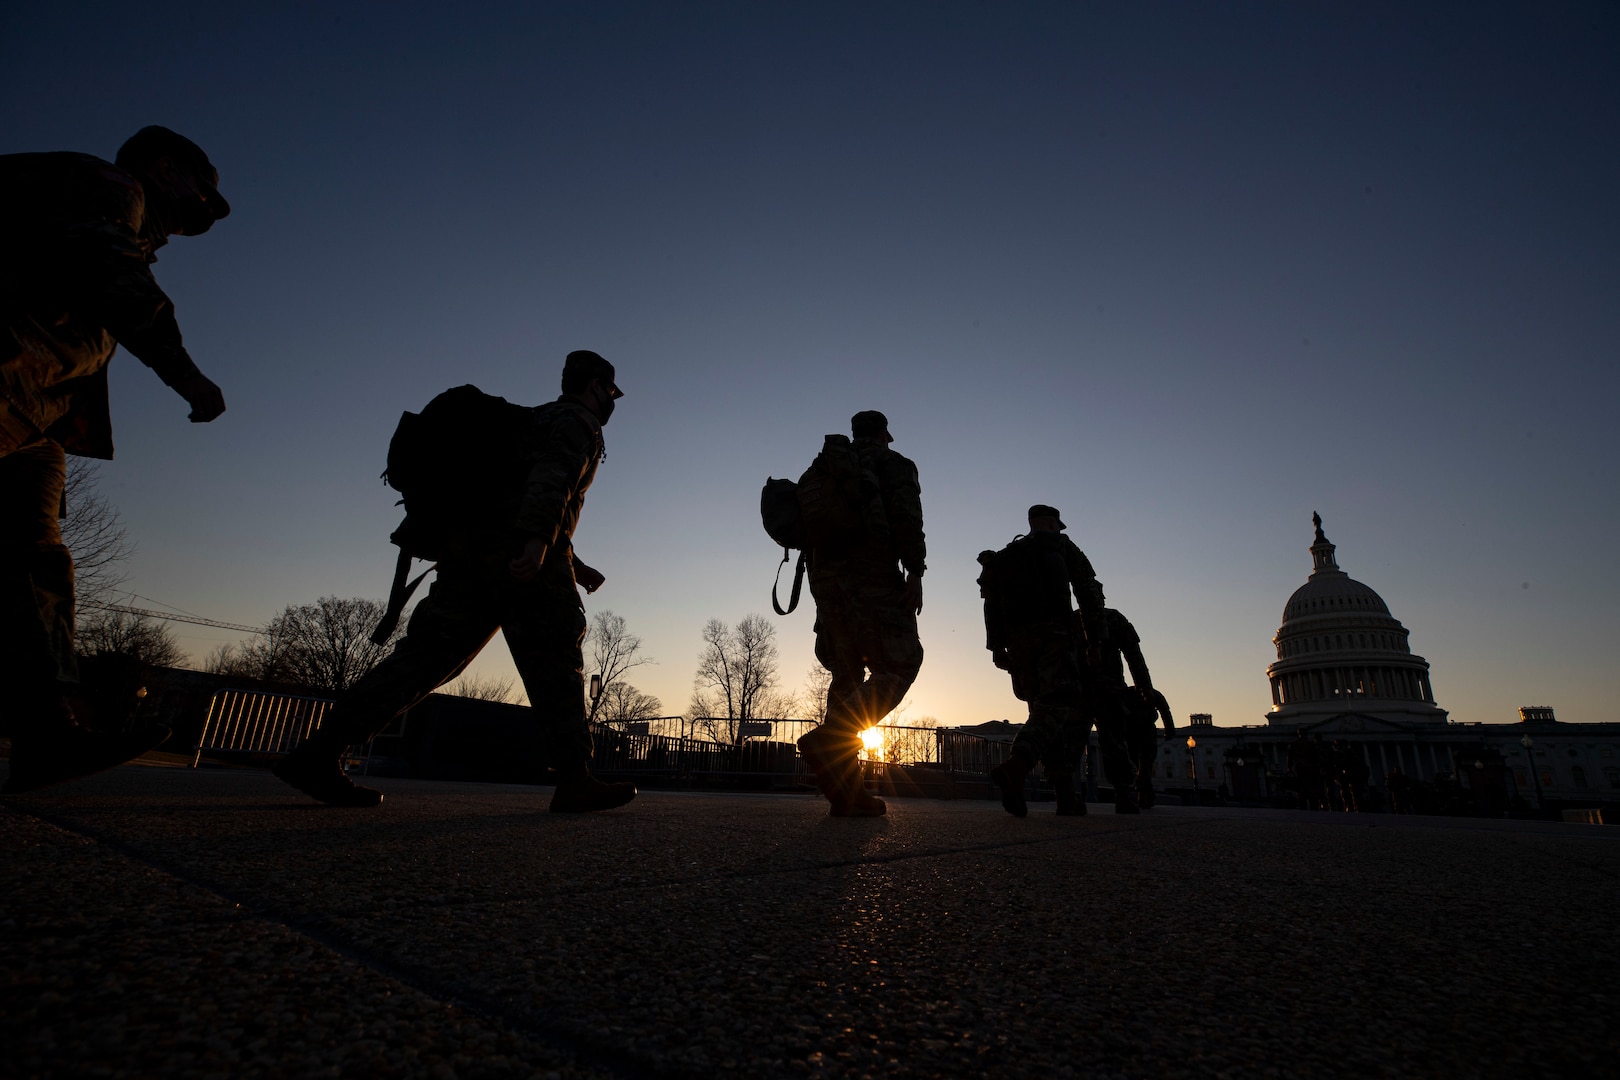 New Jersey National Guard Soldiers and Airmen from 1st Battalion, 114th Infantry Regiment, 508th Military Police Company, 108th Wing, and 177th Fighter Wing, arrive near the U.S. Capitol Jan. 12, 2021. National Guard Soldiers and Airmen from every state, territory and the District of Columbia traveled to Washington to support federal and district authorities for the 59th Presidential Inauguration.